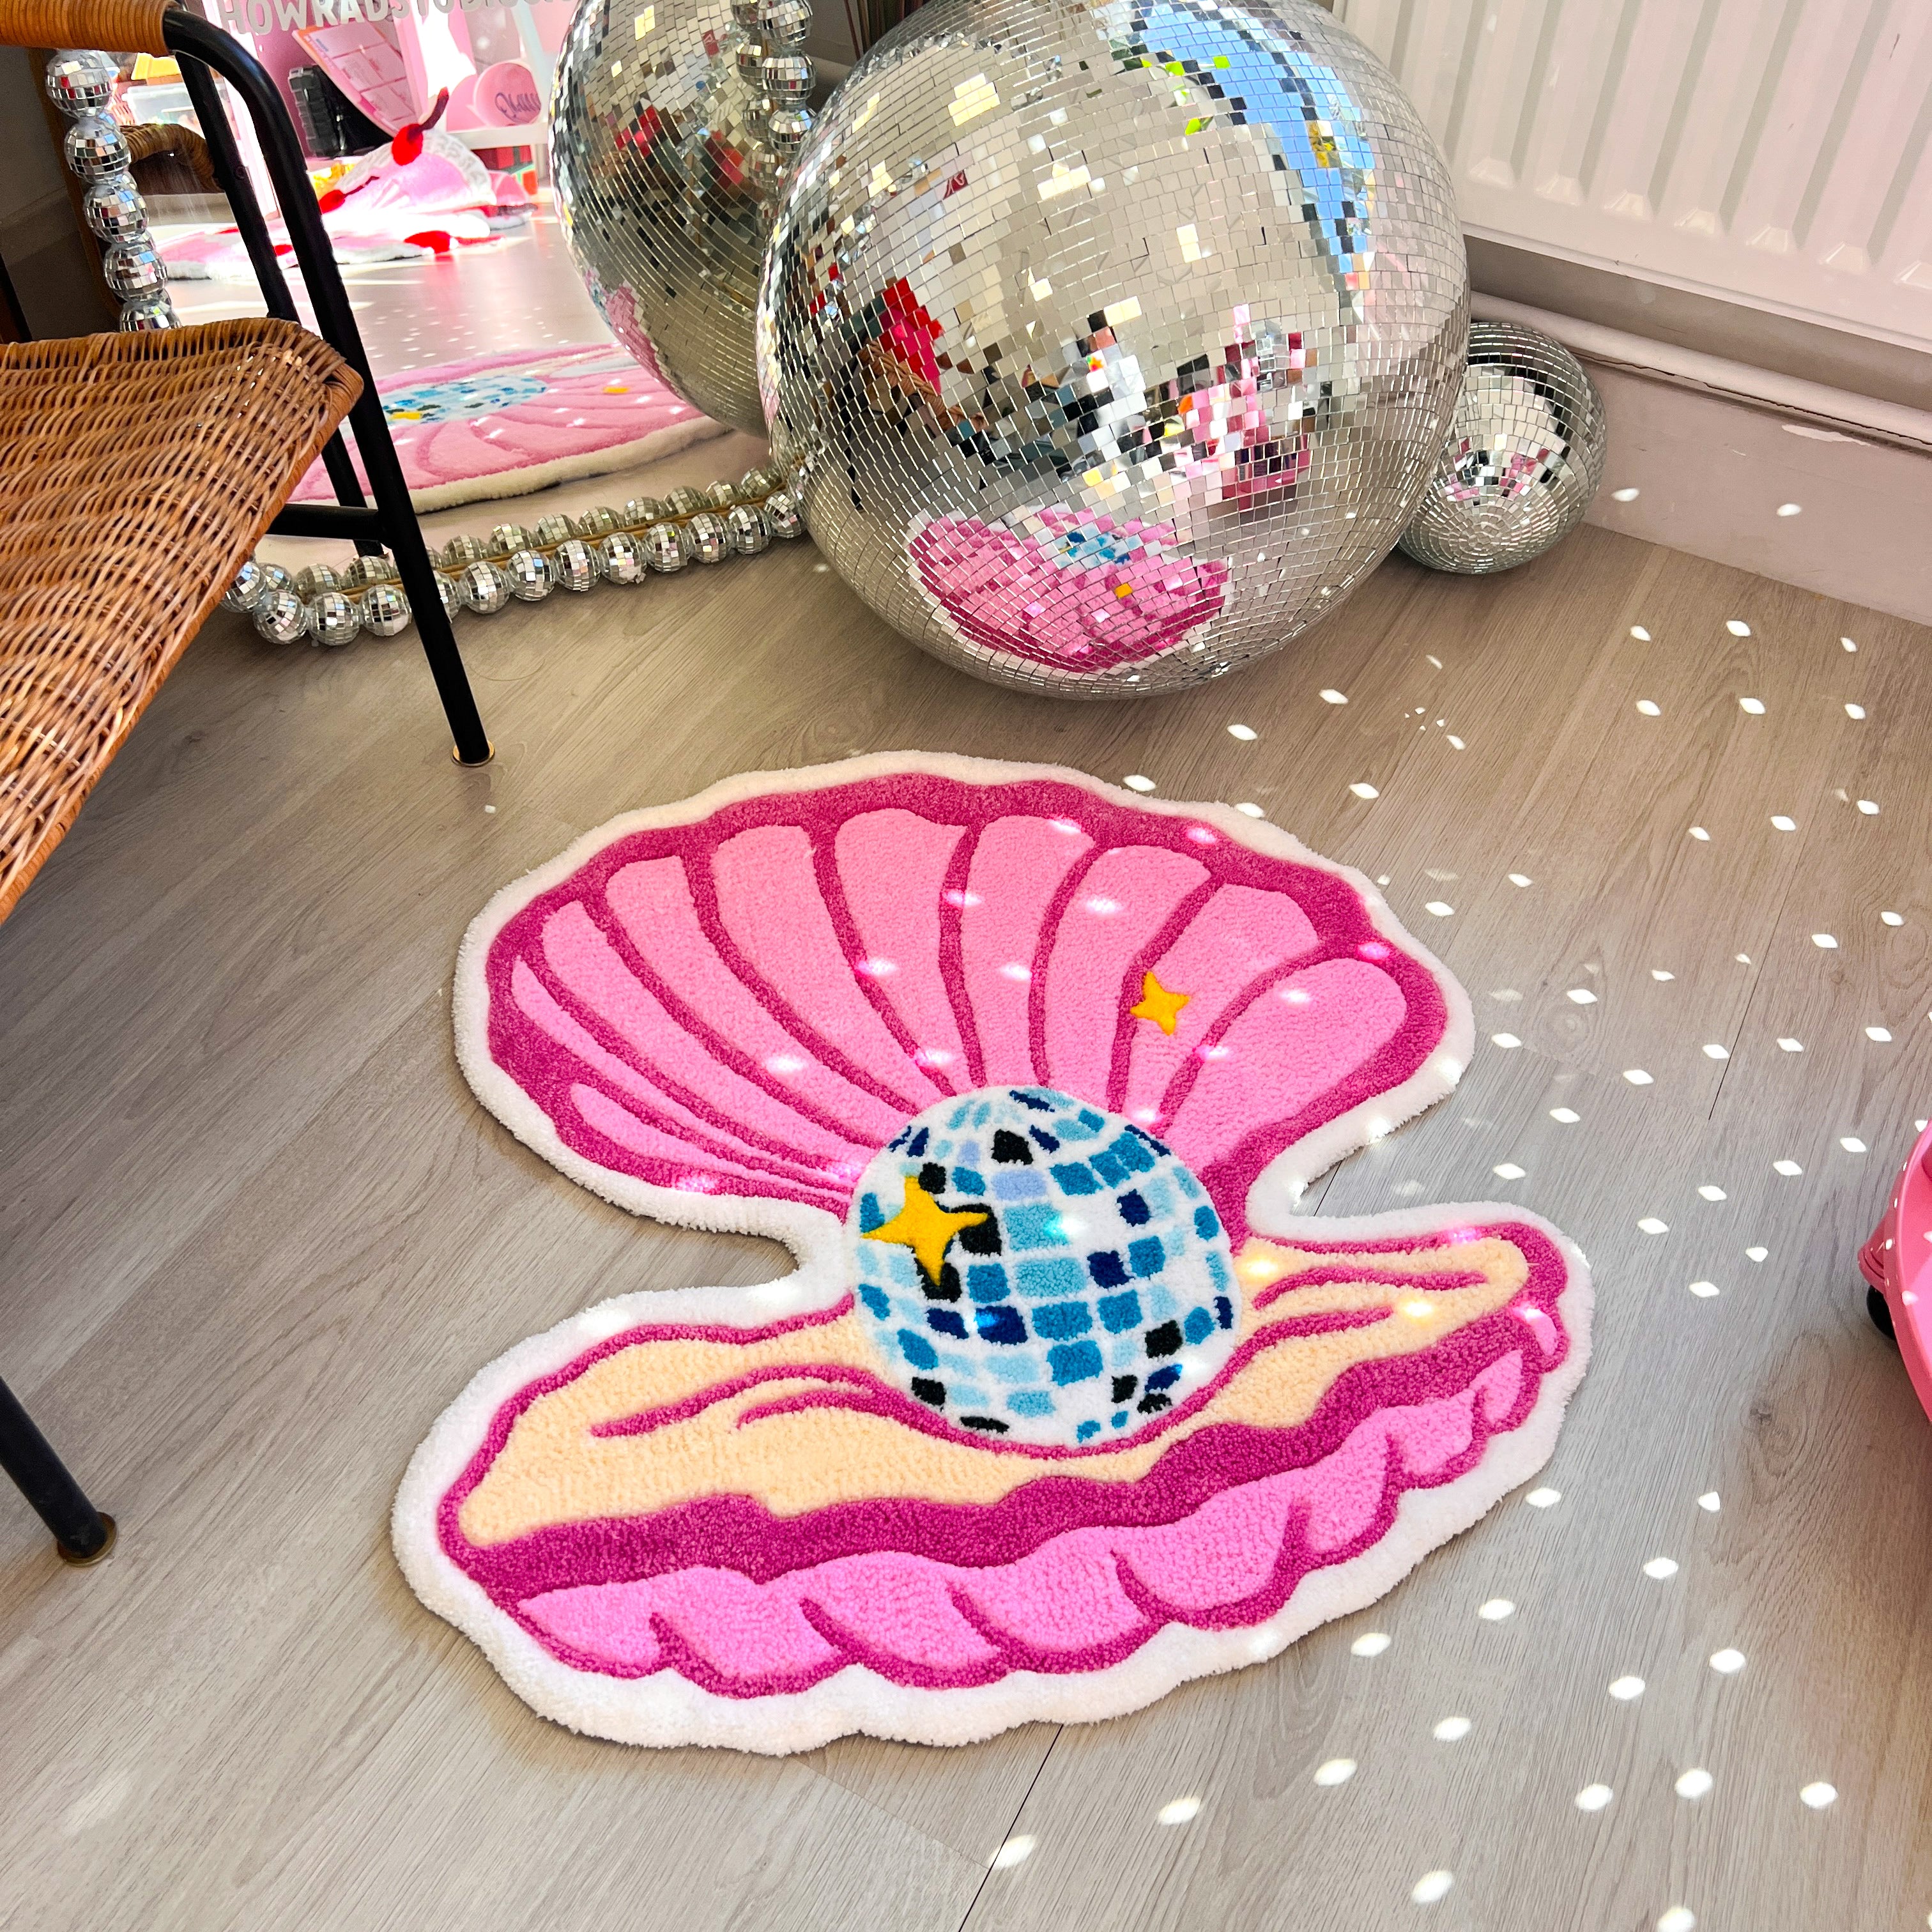 Mother of Disco Pearl Rug